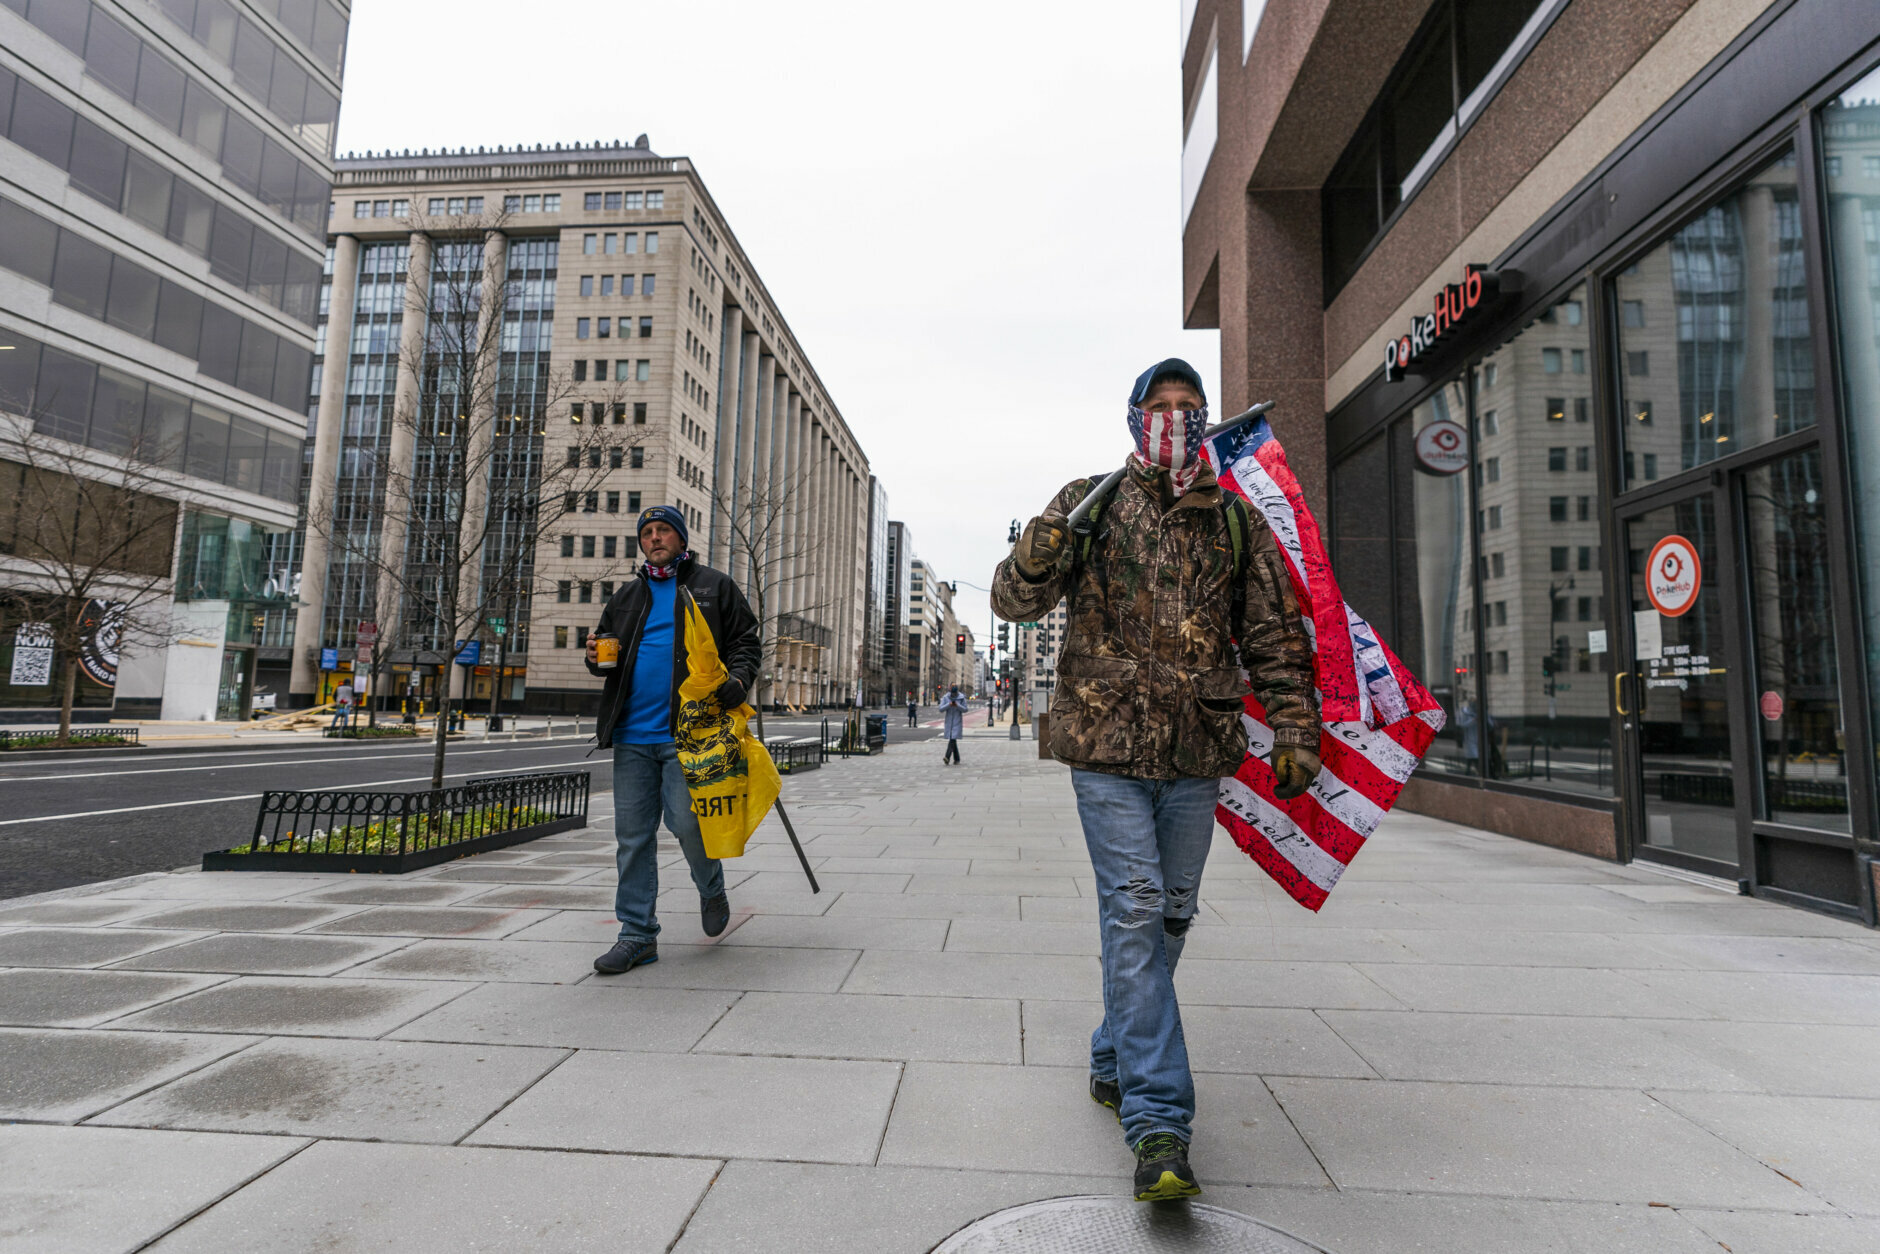 Supporter of President Donald Trump Justine Lagesse, right, from southern Illinois, carries a flag as he walks at an almost deserted street in downtown Washington, Tuesday, Jan. 5, 2021 in Washington. (AP Photo/Manuel Balce Ceneta)